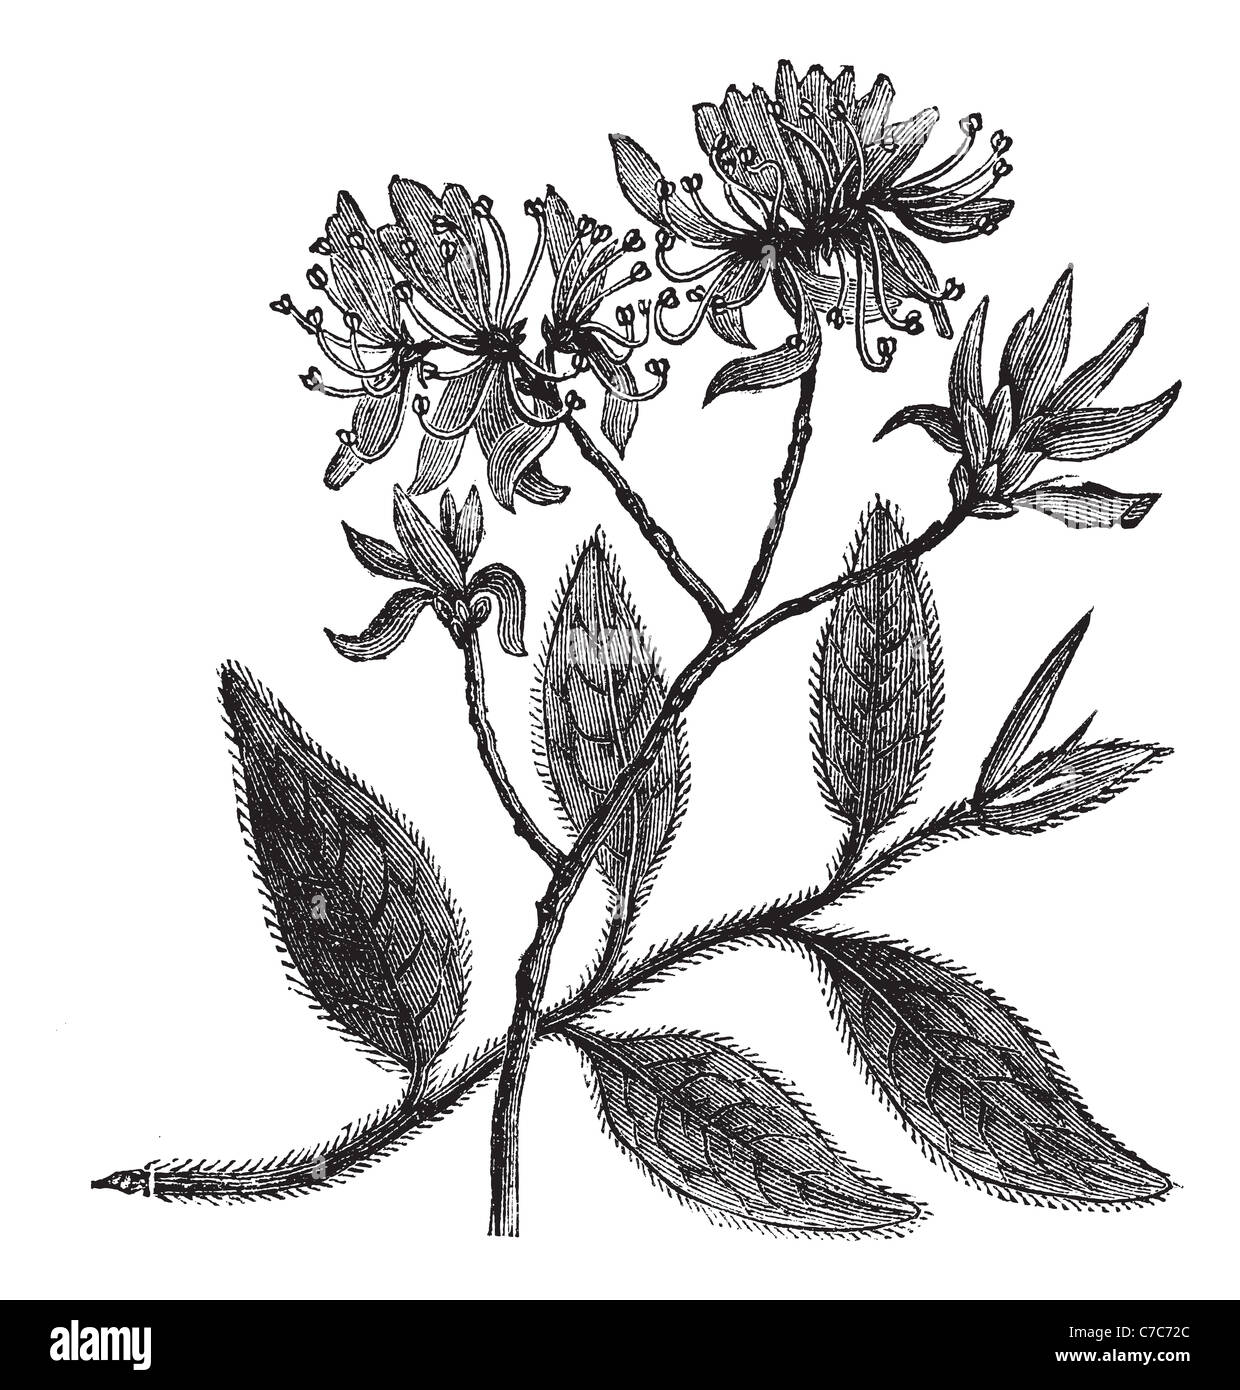 Rhodora or Rhododendron canadense, vintage engraving. Old engraved illustration of Rhodora isolated on a white background. Stock Photo